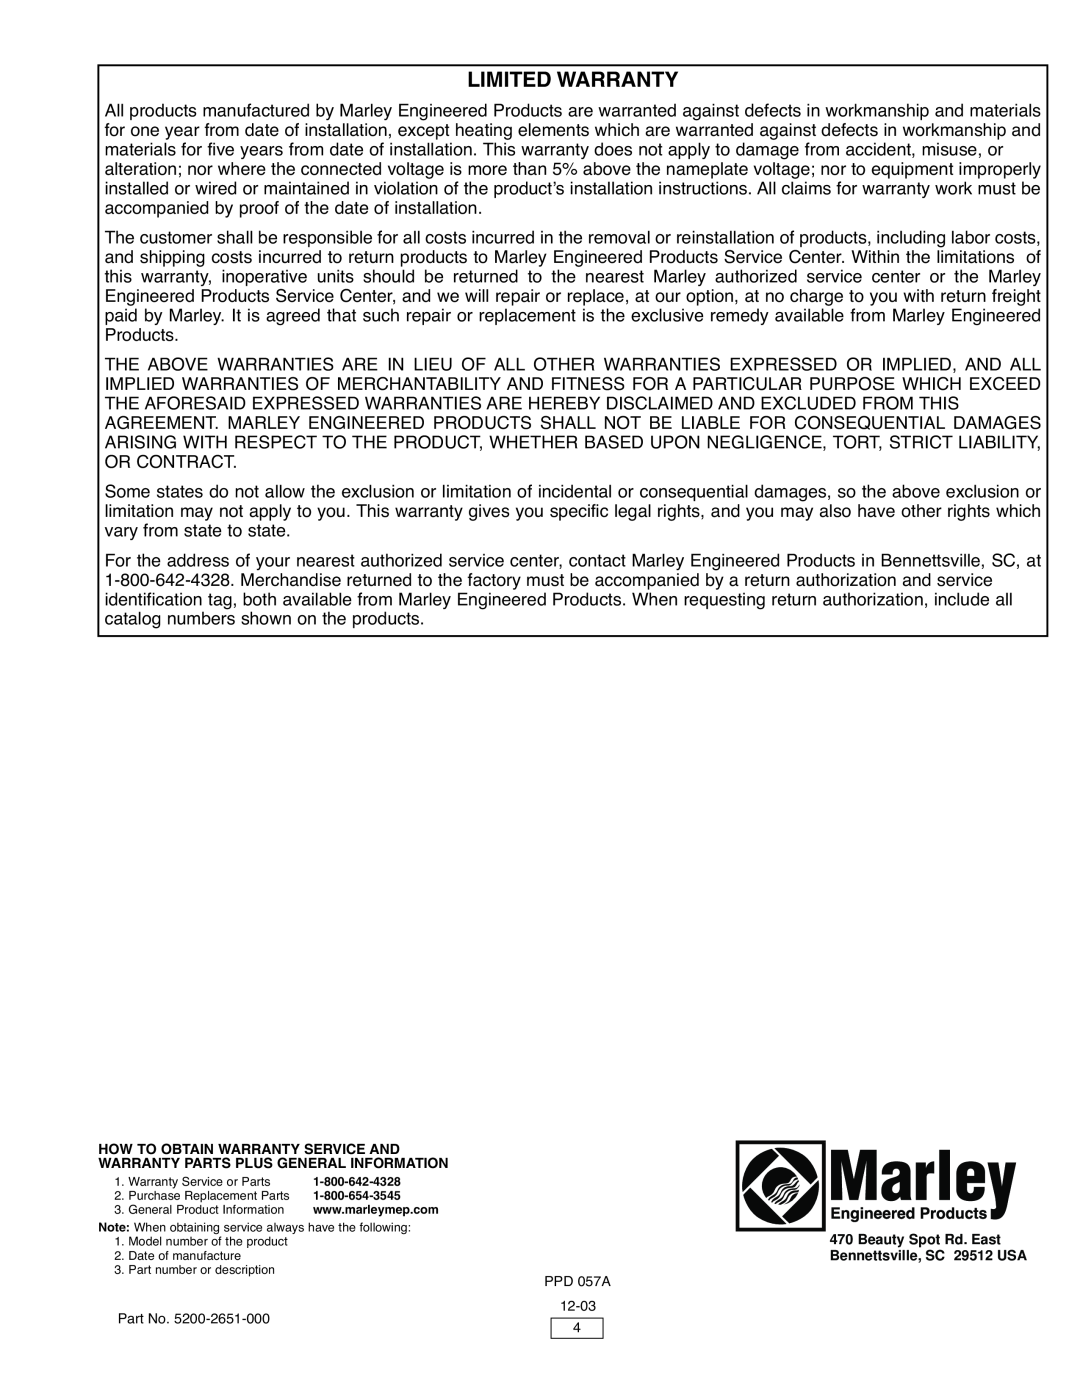 Marley Engineered Products L SERIES instruction sheet Limited Warranty, How To Obtain Warranty Service And 